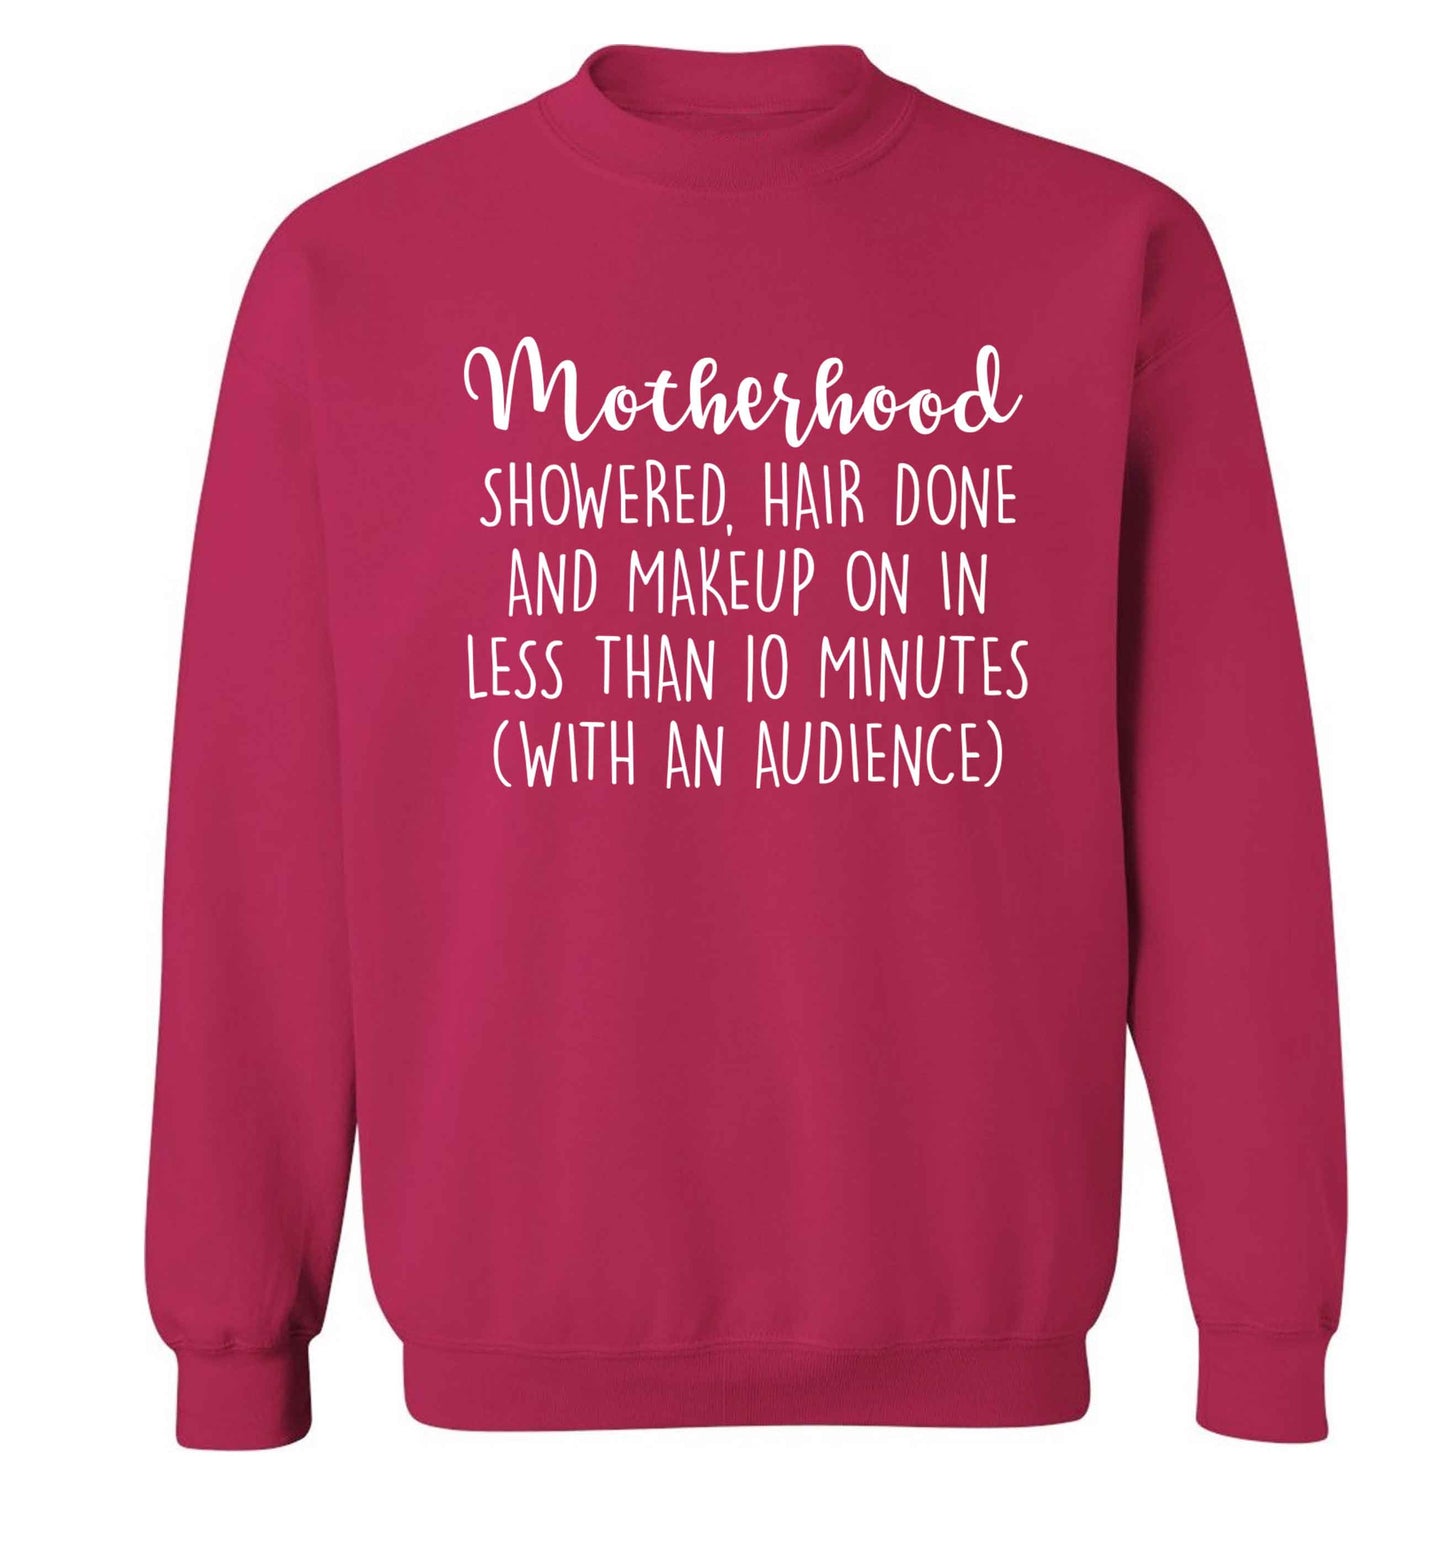 Motherhood, showered, hair done and makeup on Adult's unisex pink Sweater 2XL